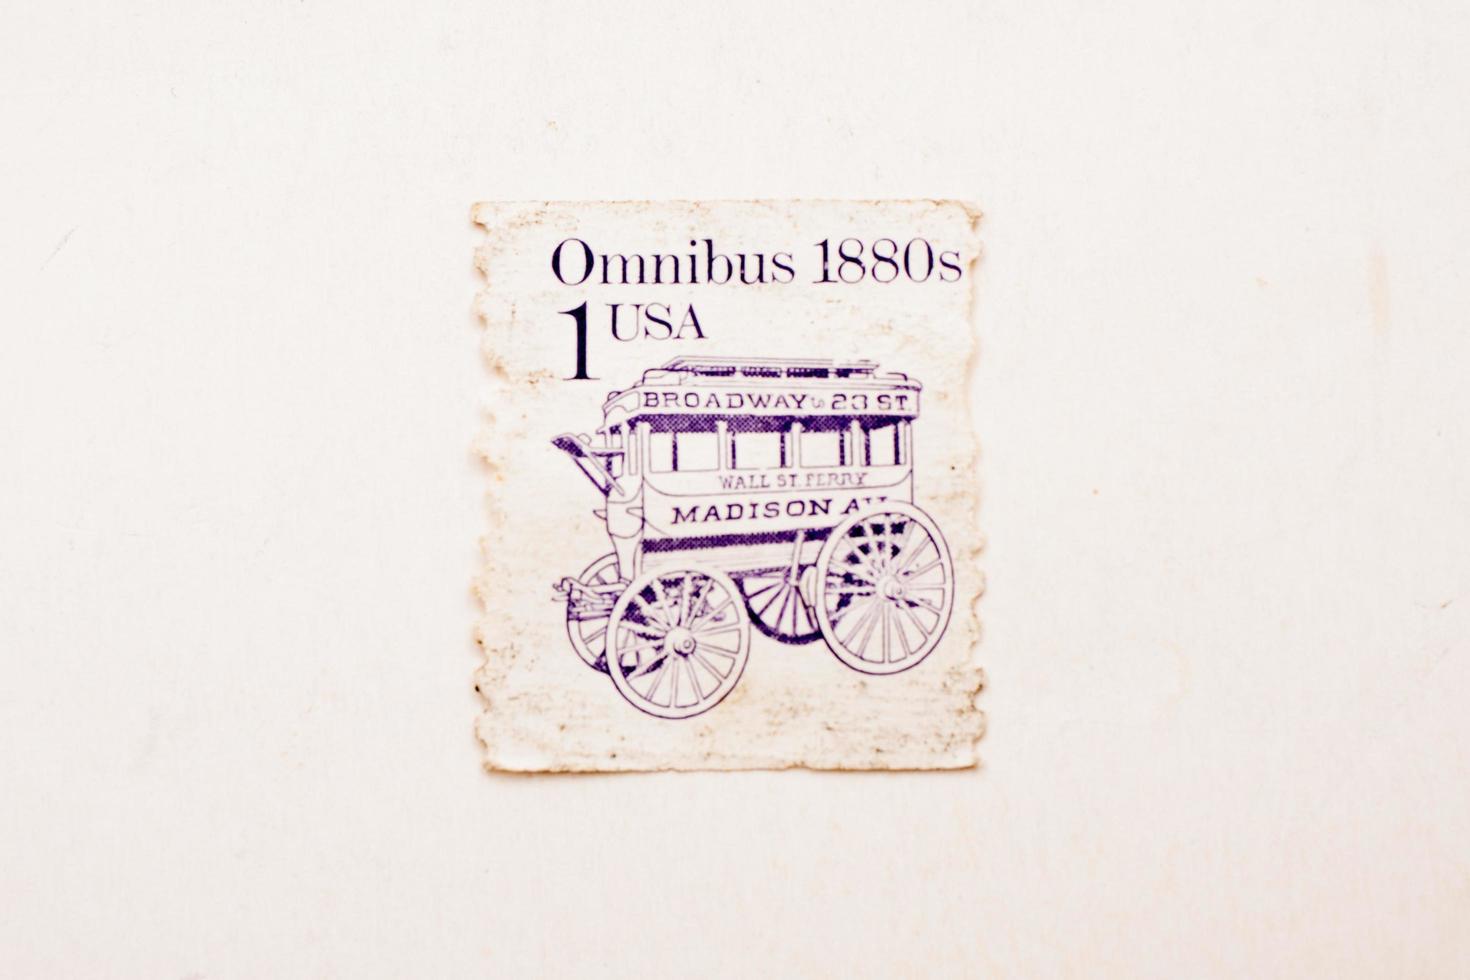 El Paso, Texas, May 30 2022 The Collectible Omnibus 1880s USA 1 cent stamp photo